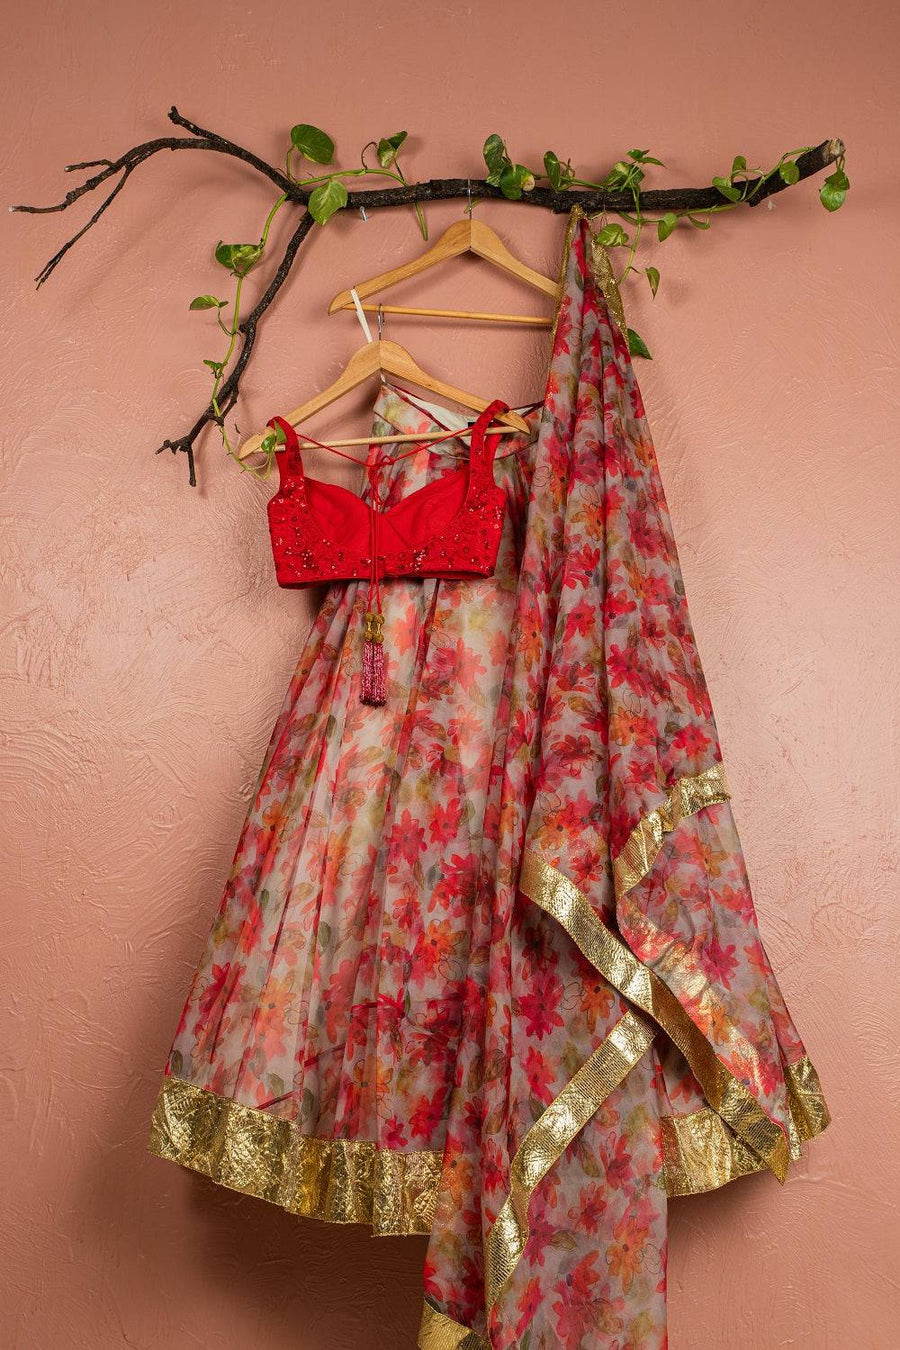 Red Printed Floral Lehenga with Red Embroidered Blouse - WaliaJones